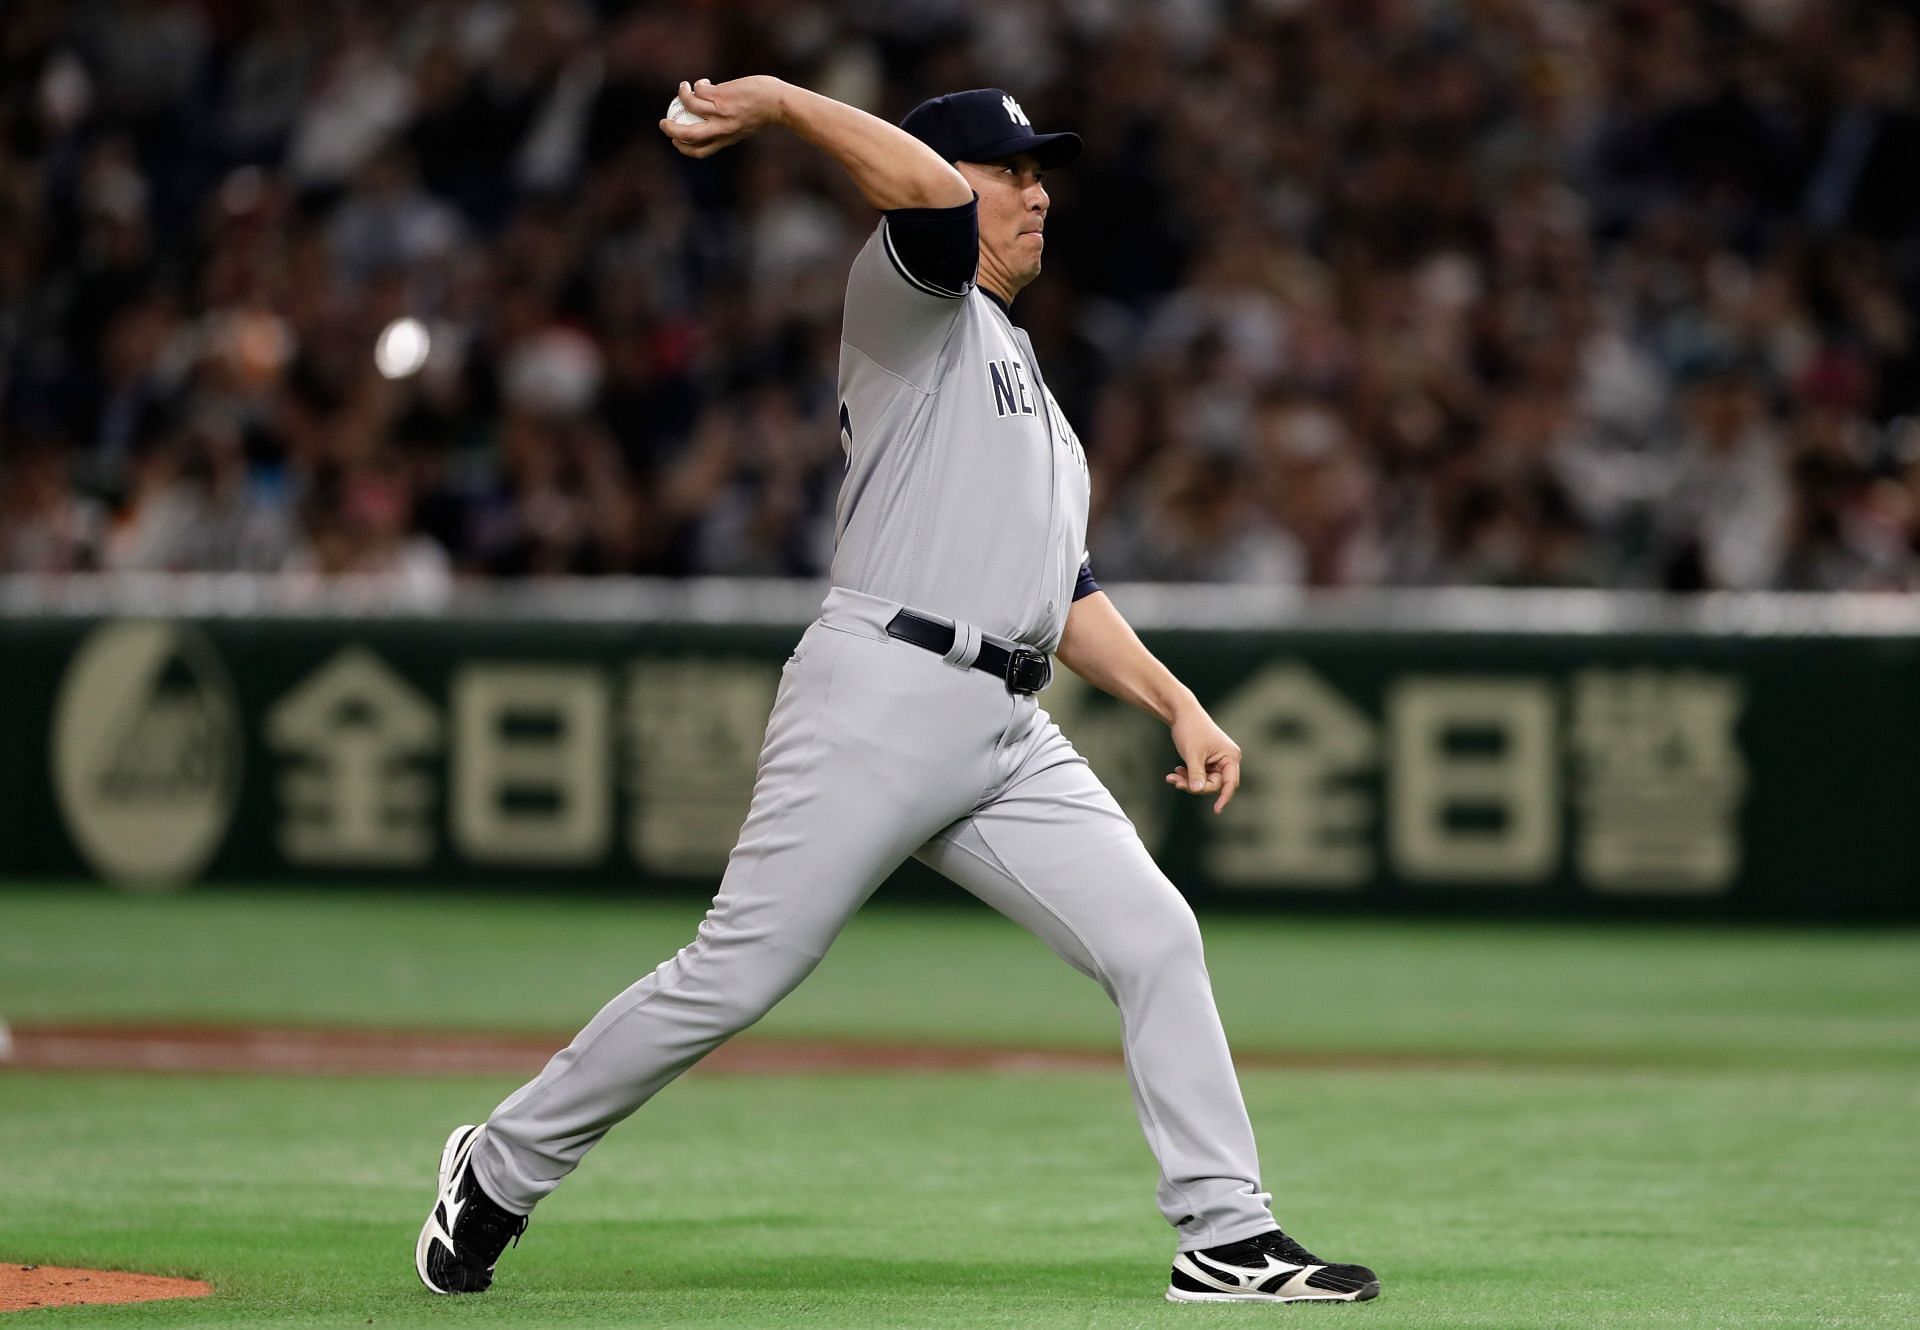 Back in 2018, Hideki Matsui shared his reservations about Shohei Ohtani&rsquo;s ambitious two-way talent